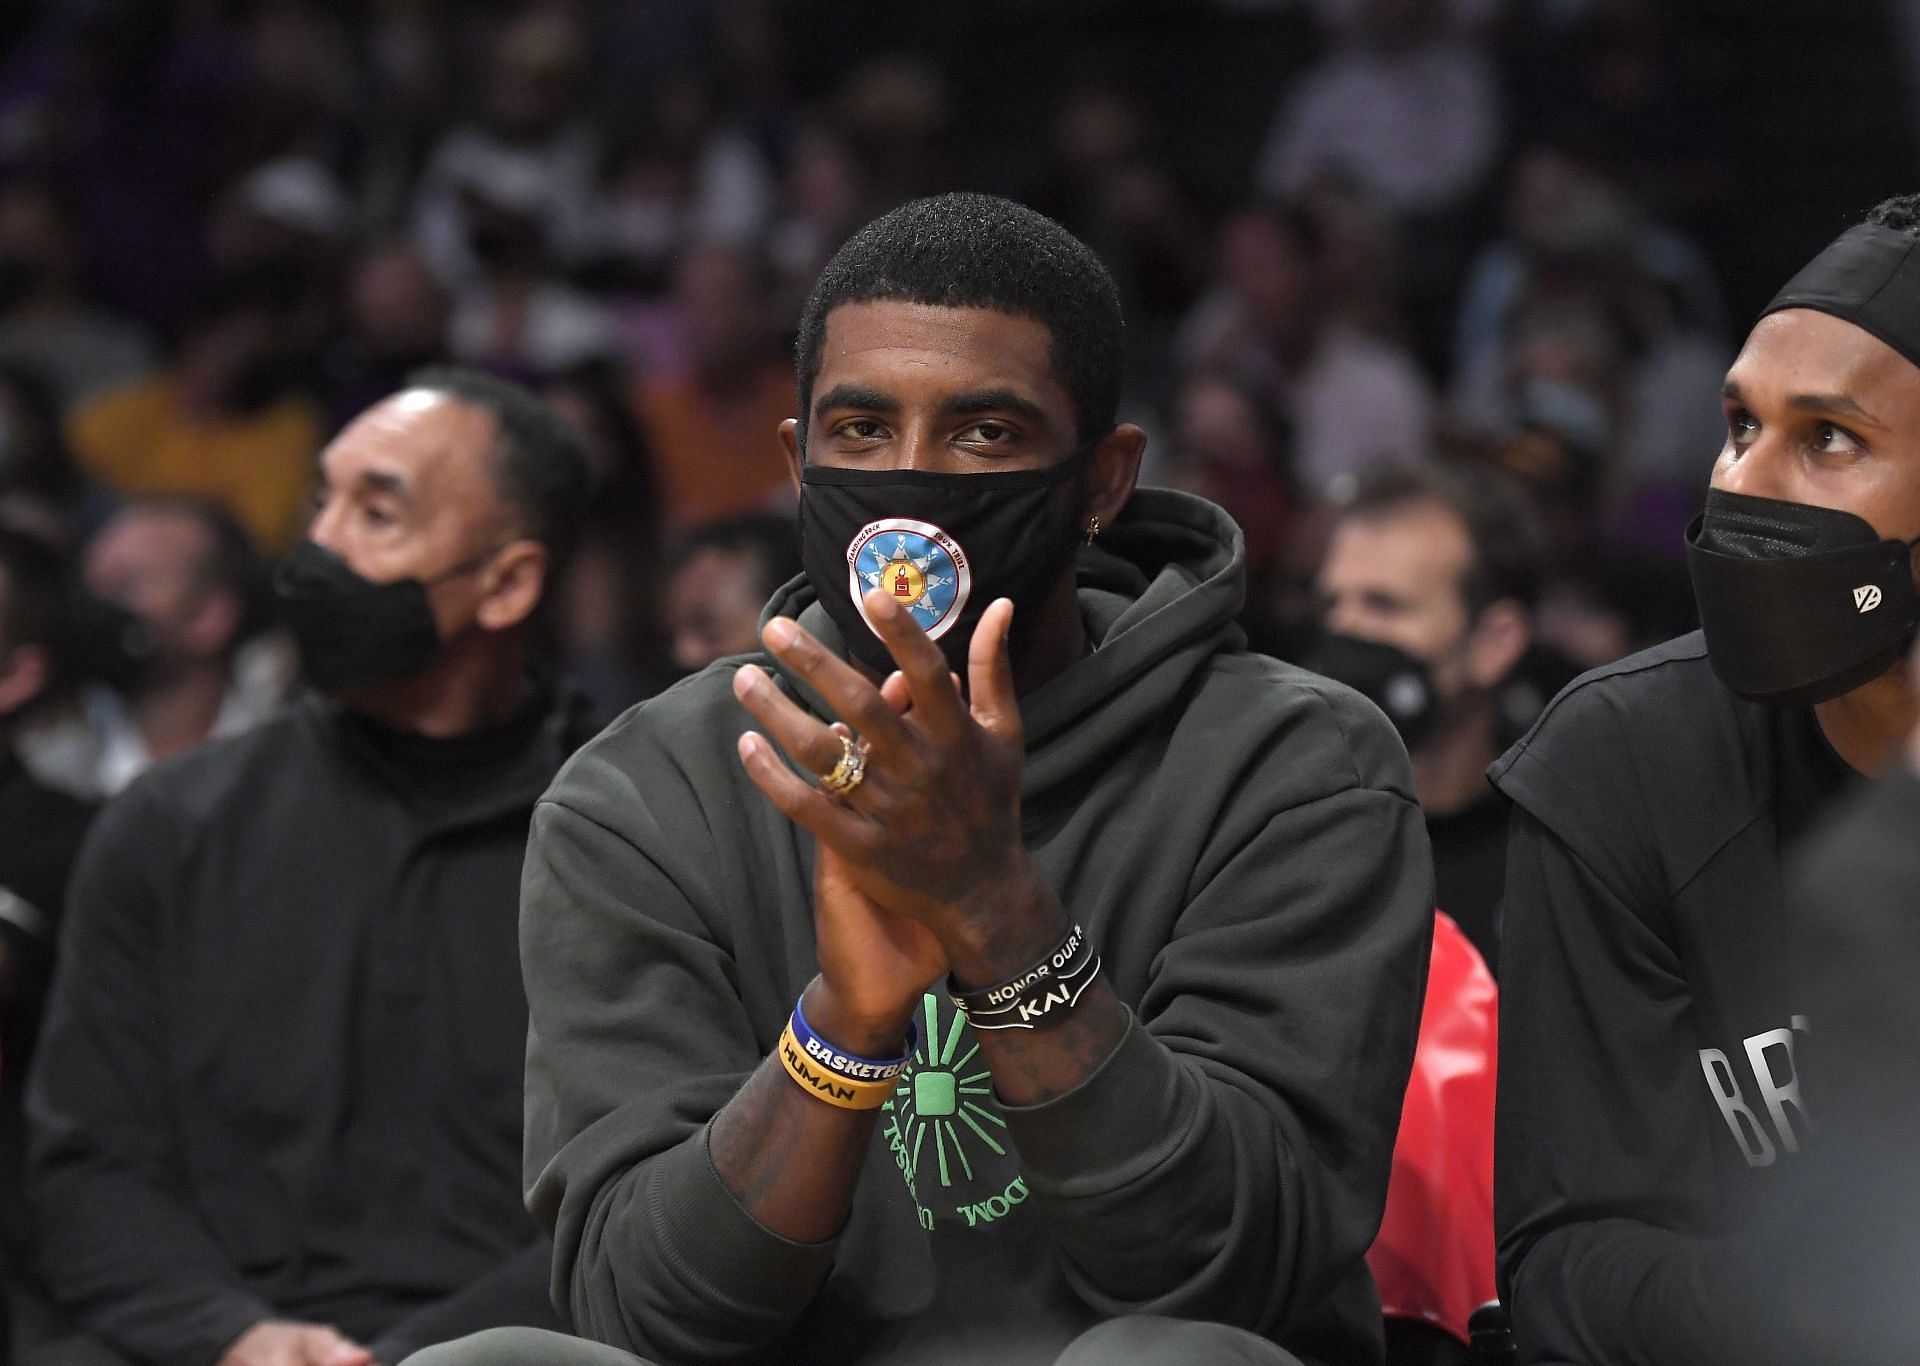 All-Star point guard Kyrie Irving is out of the Brooklyn Nets team indefinitely